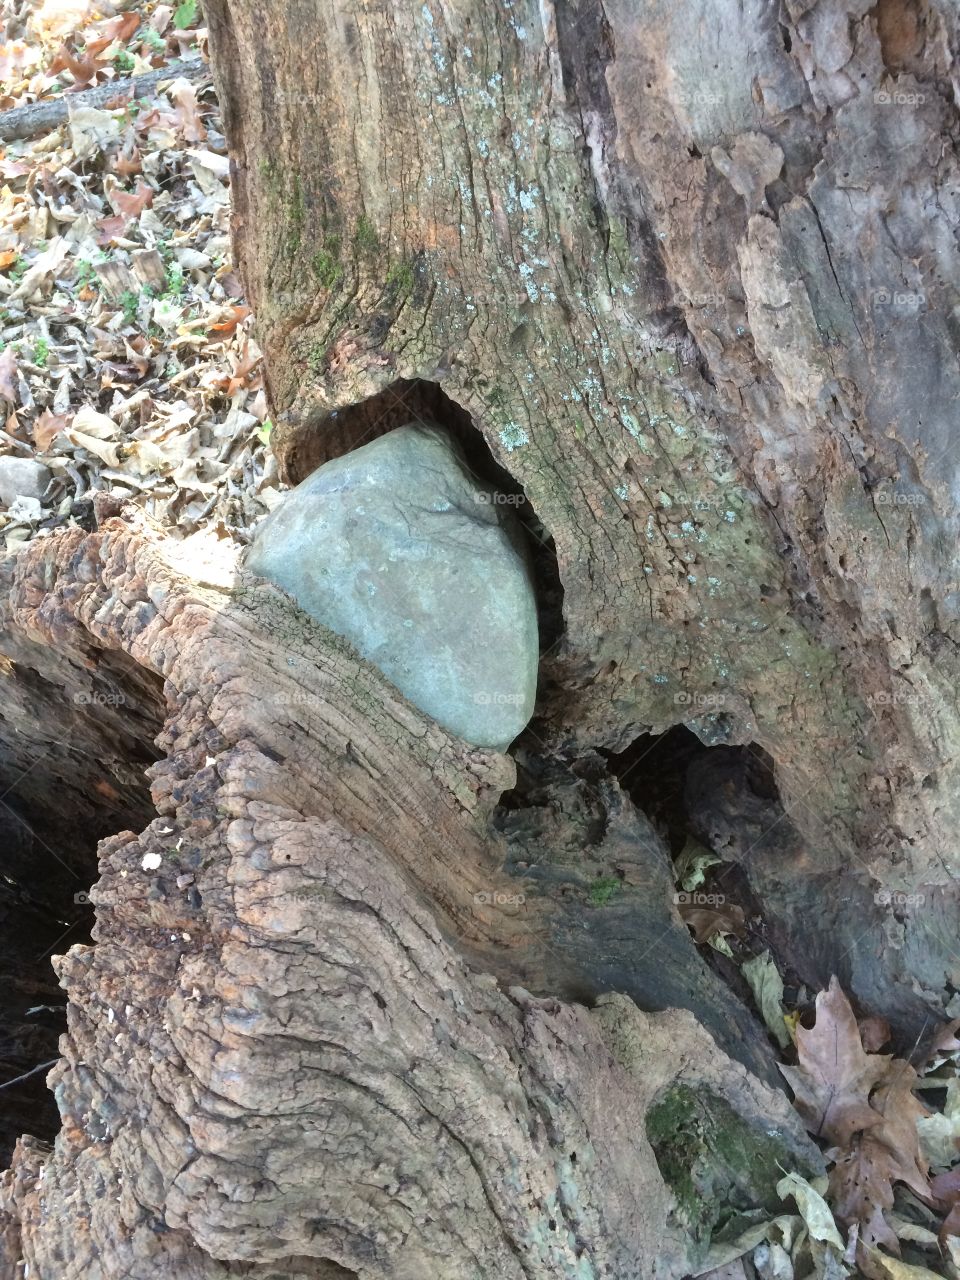 This sapling grew around this rock many years ago. Now it is returning it back to its original resting place.